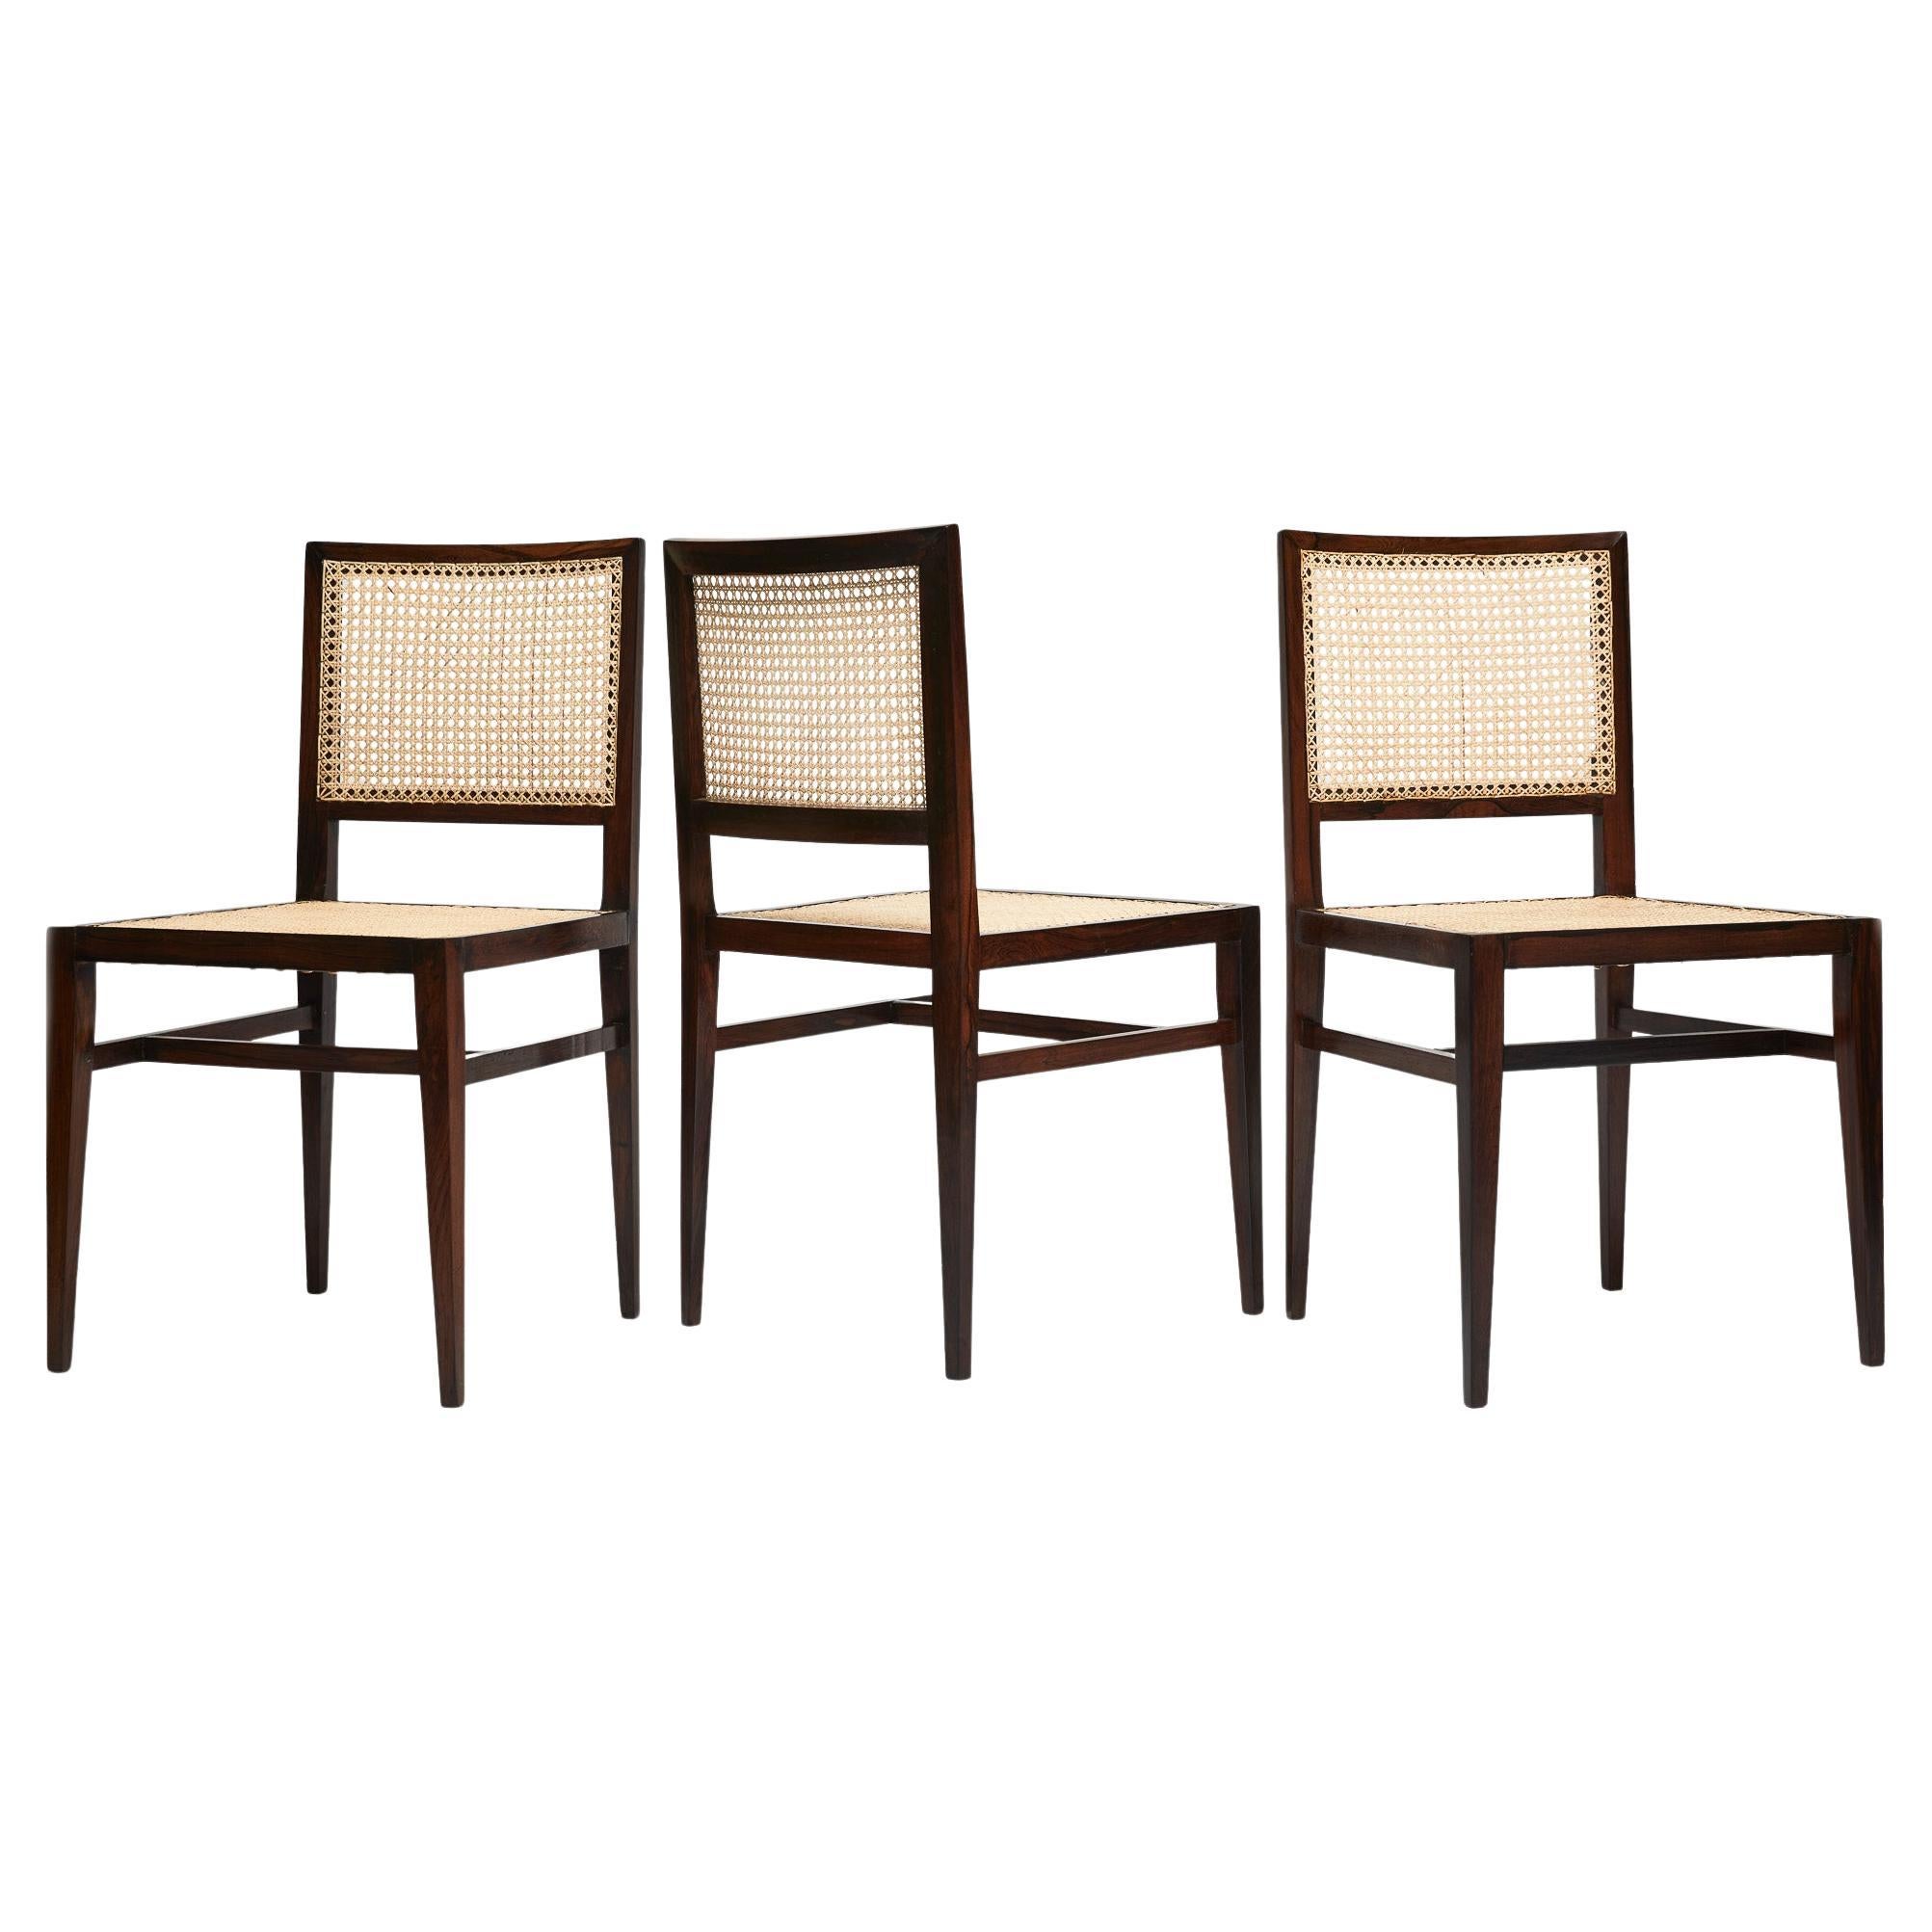 Available today, this exquisite Mid-Century Modern Armchairs in Hardwood & Cane, designed by Joaquim Tenreiro are exquisite! The boldness of the high-quality Jacaranda wood is eased by the cane backpiece, giving it a light and adaptable feel.